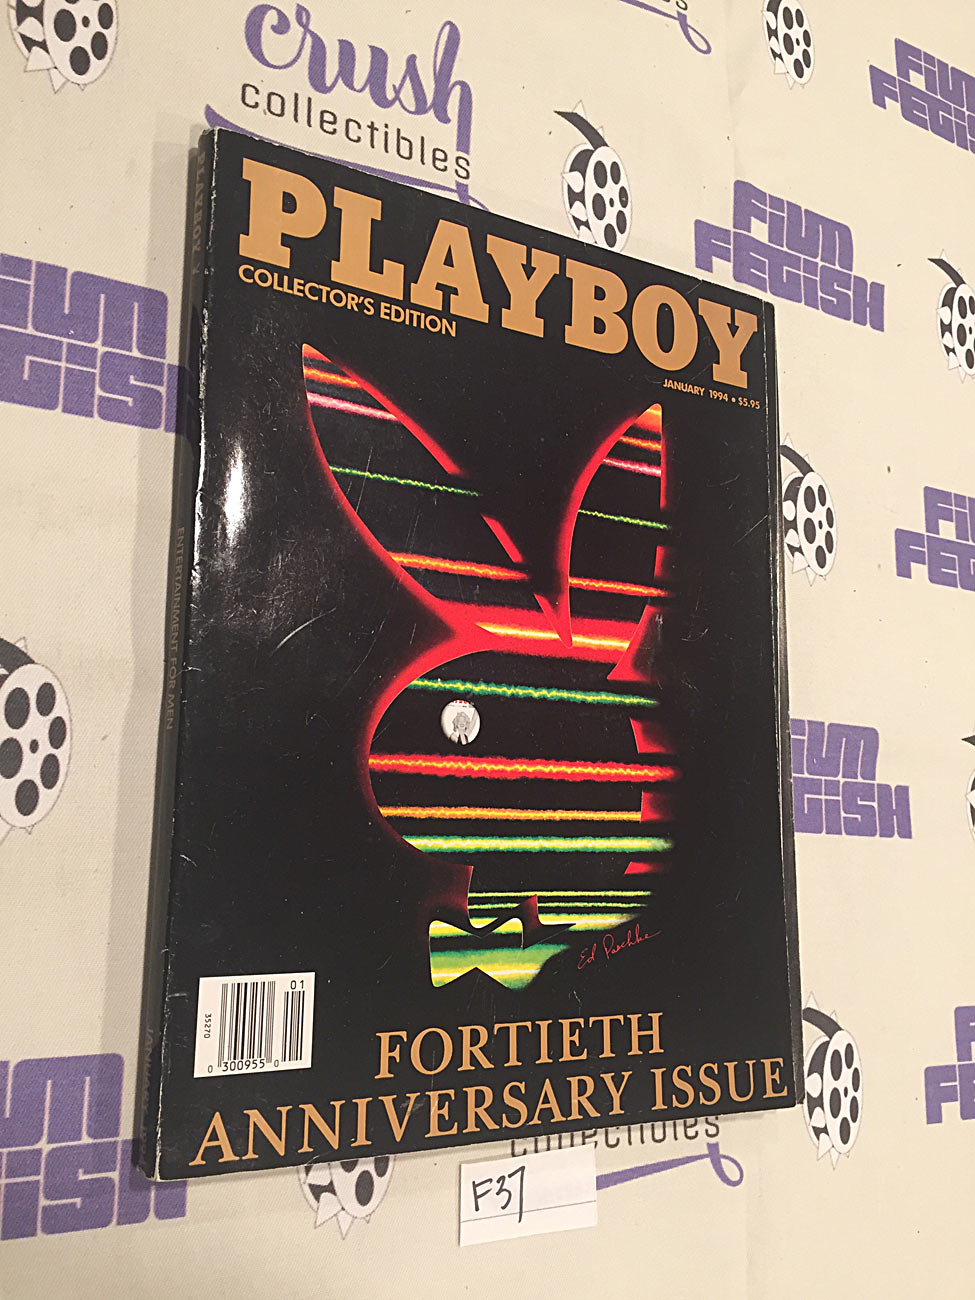 Playboy Magazine Collector’s Edition Fortieth Anniversary Issue (January 1994) [F37]